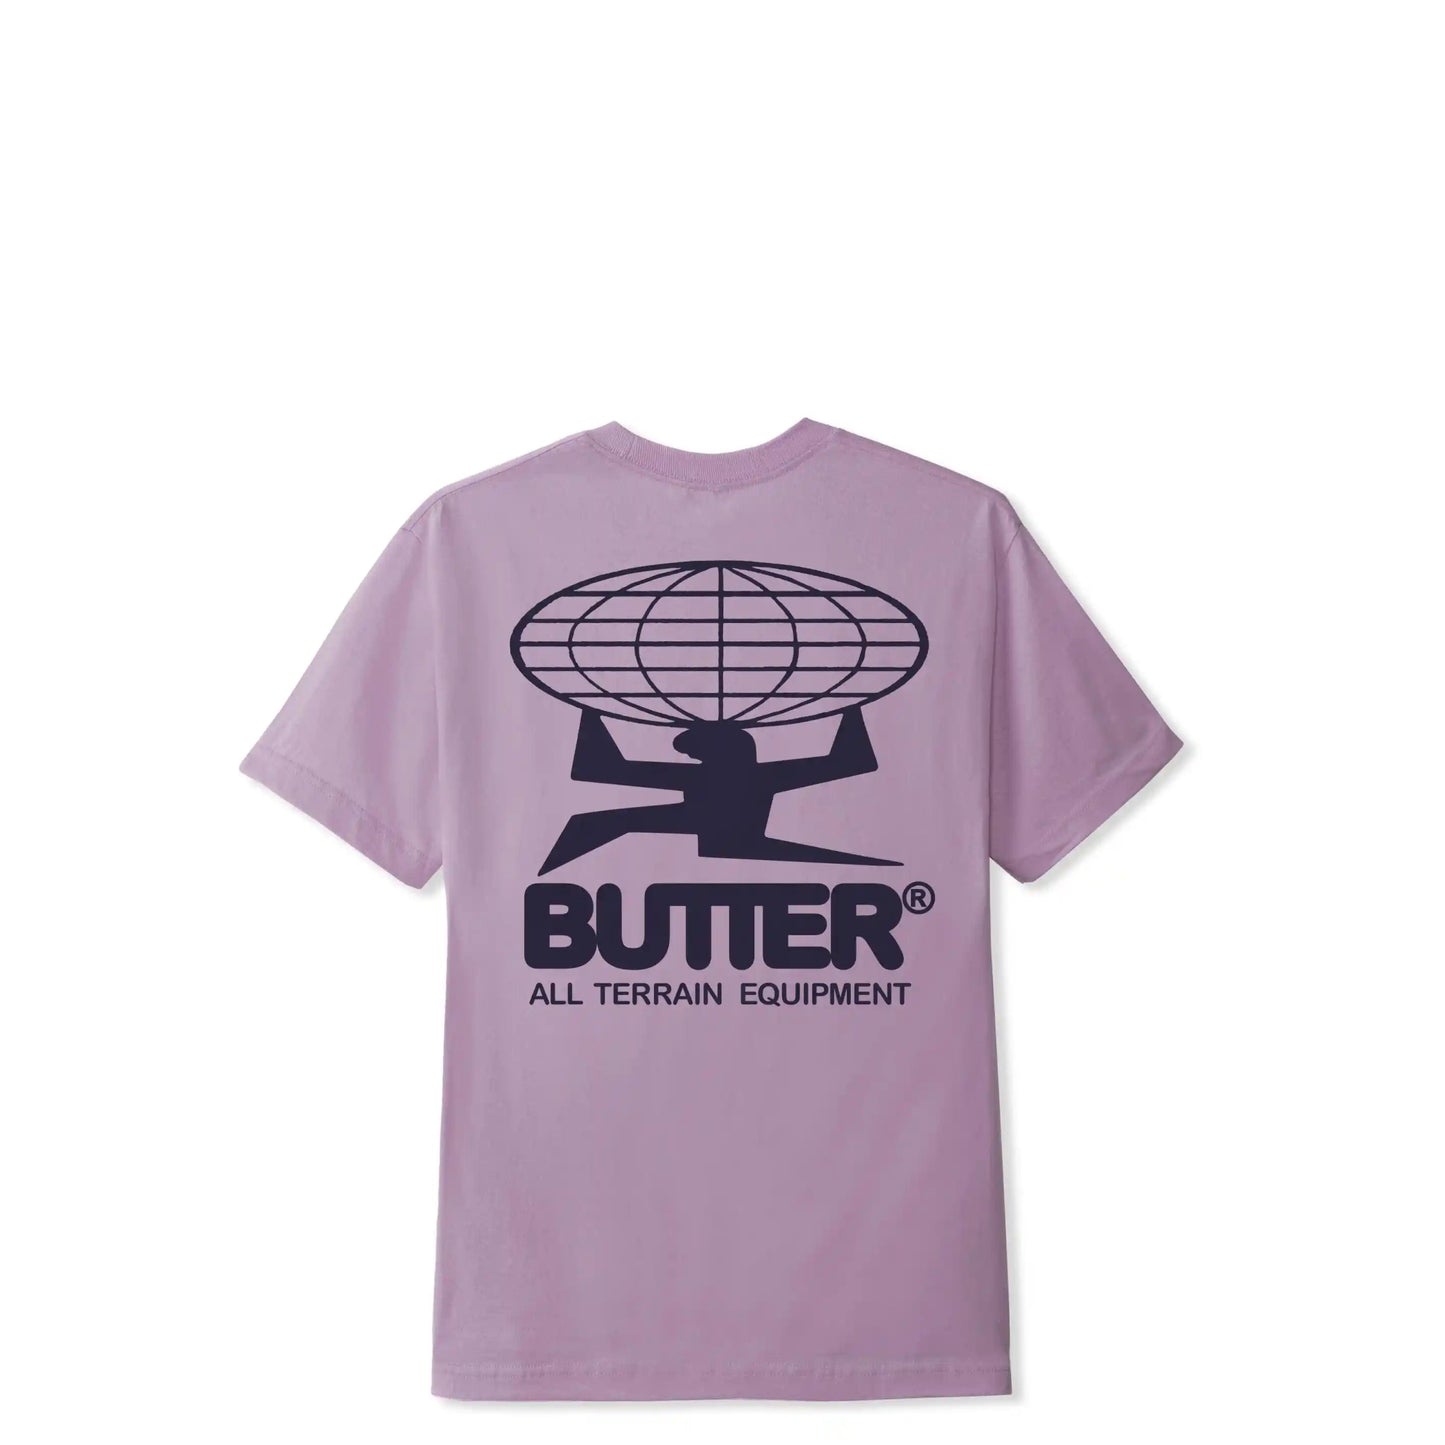 Butter Goods All Terrain Tee, washed berry - Tiki Room Skateboards - 2